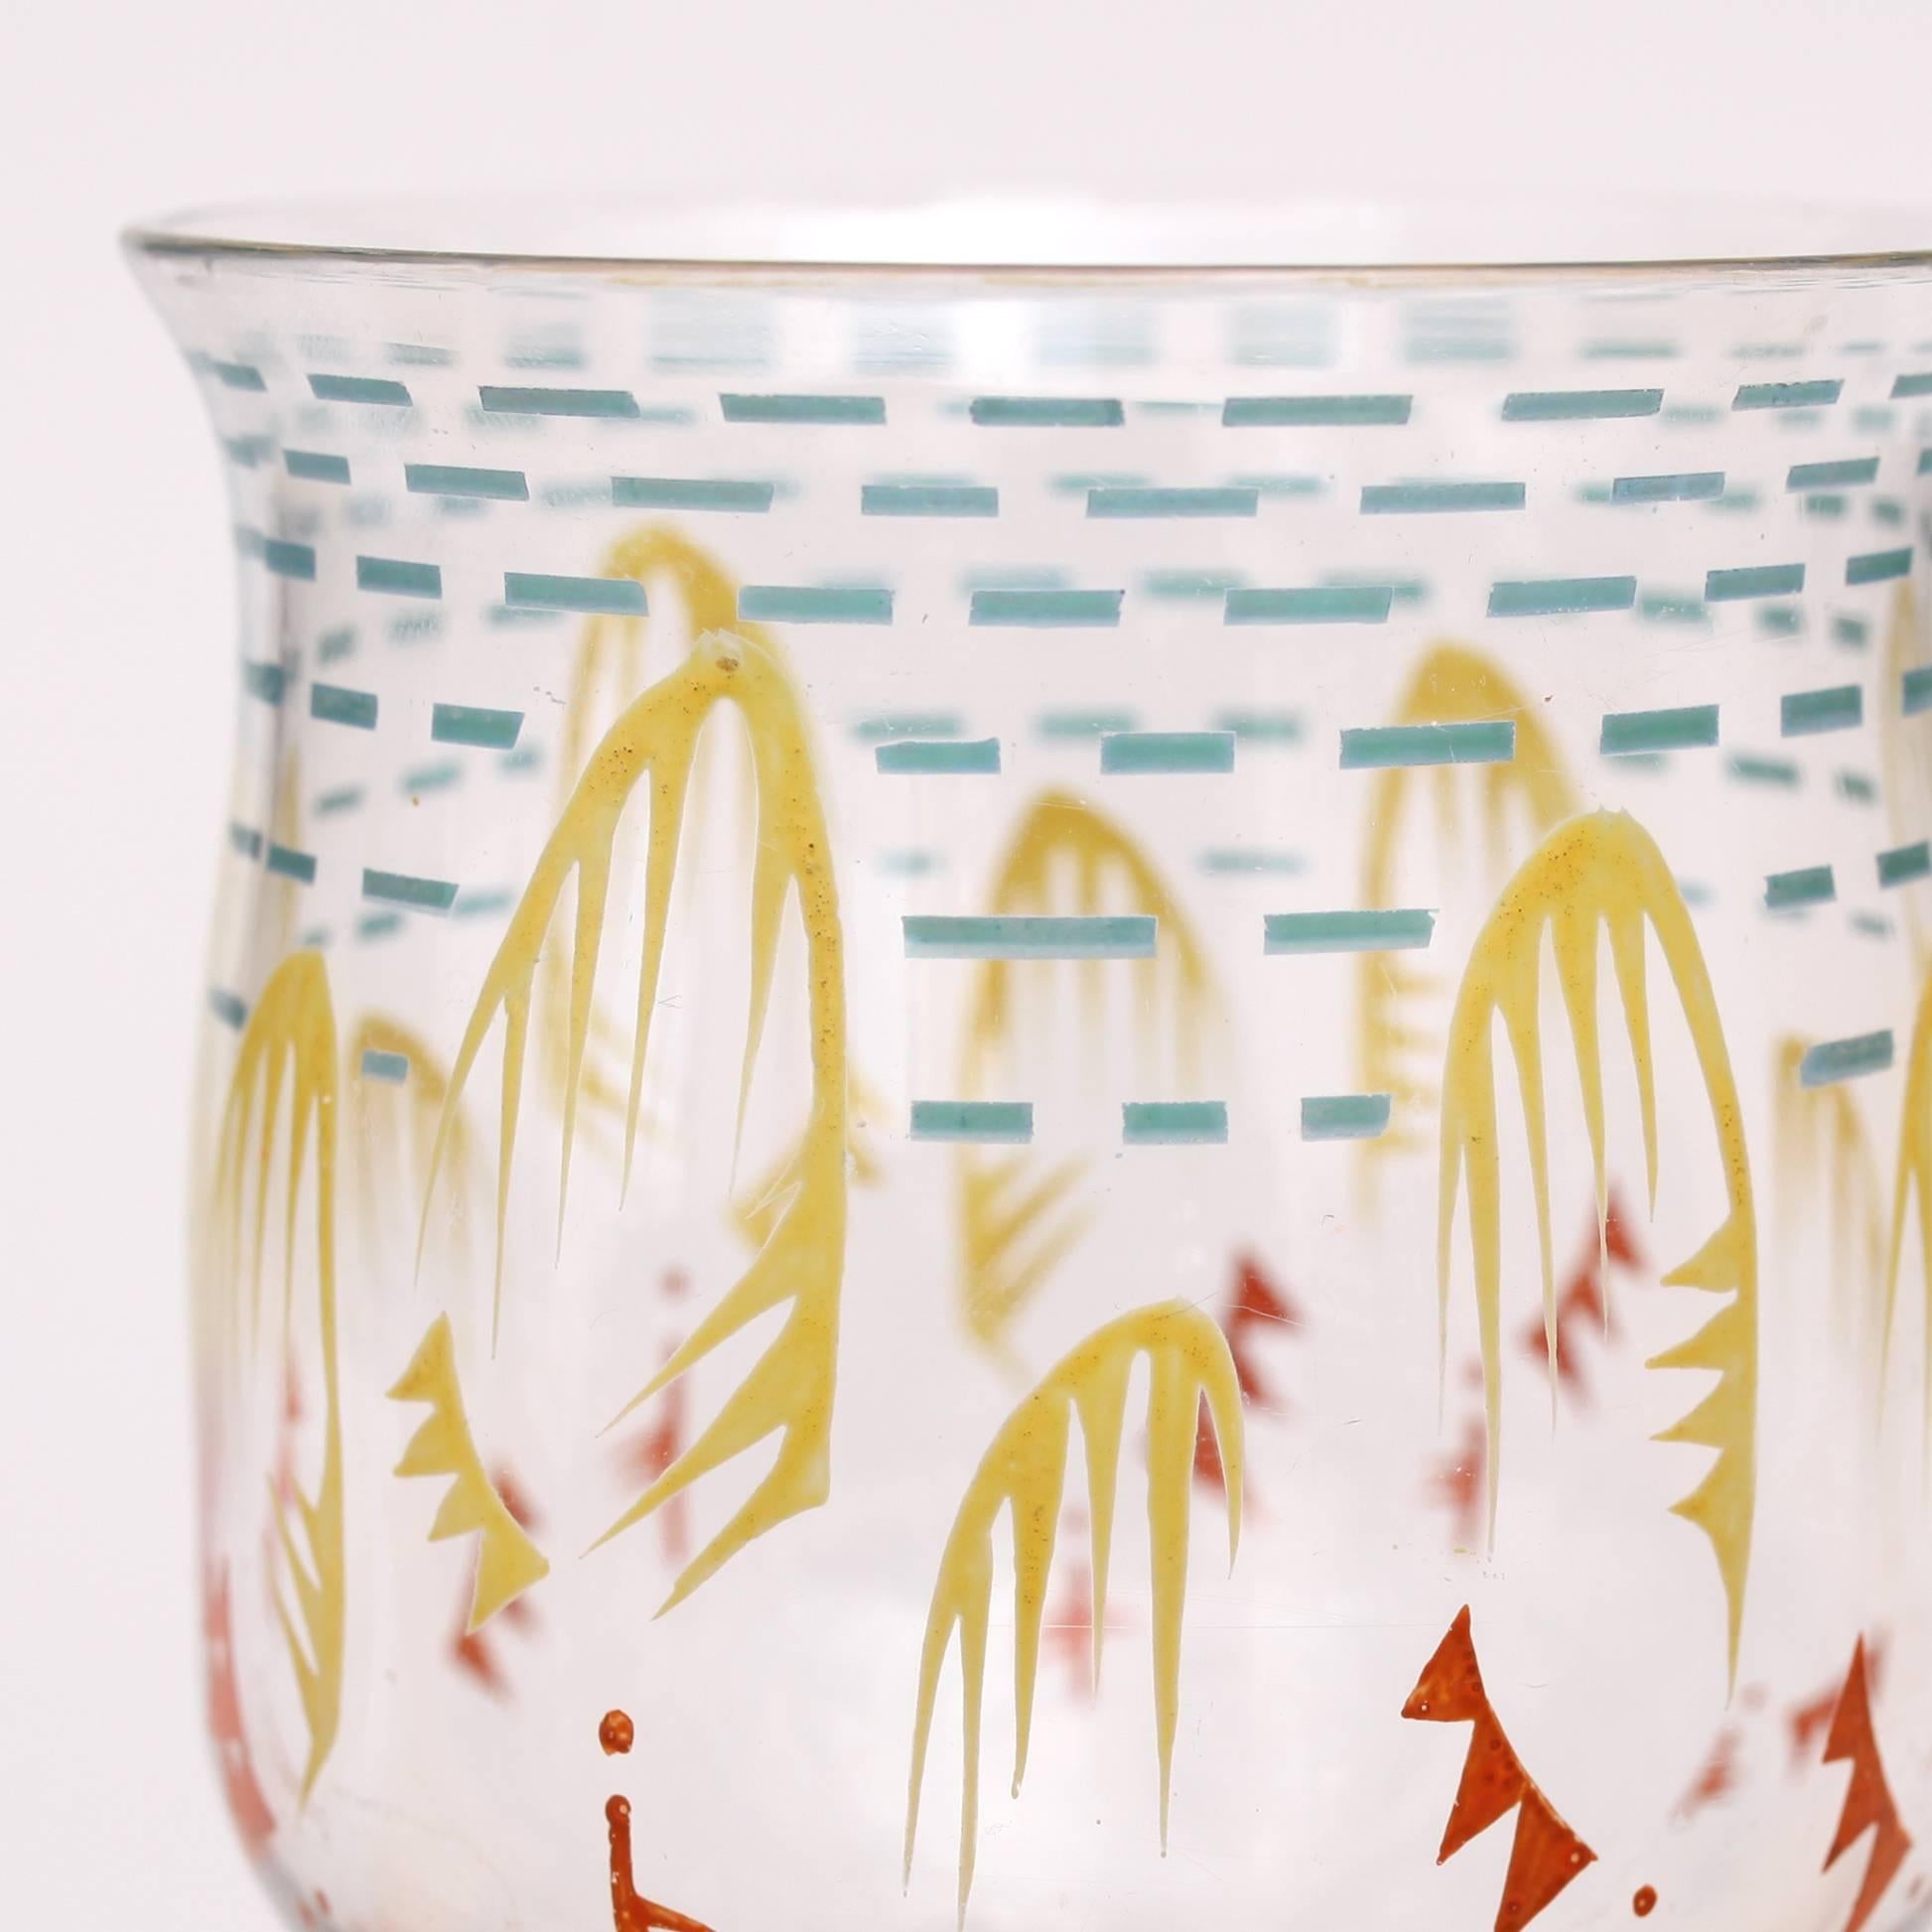 Dutch Art Deco vase with hand painted enamel decoration, design C.J.Lanooy, 1923, executed by Glasfabriek Leerdam / the Netherlands. Signed

(About Chris Lanooy)
Having established his career in ceramics from 1907, Lanooy was already working for